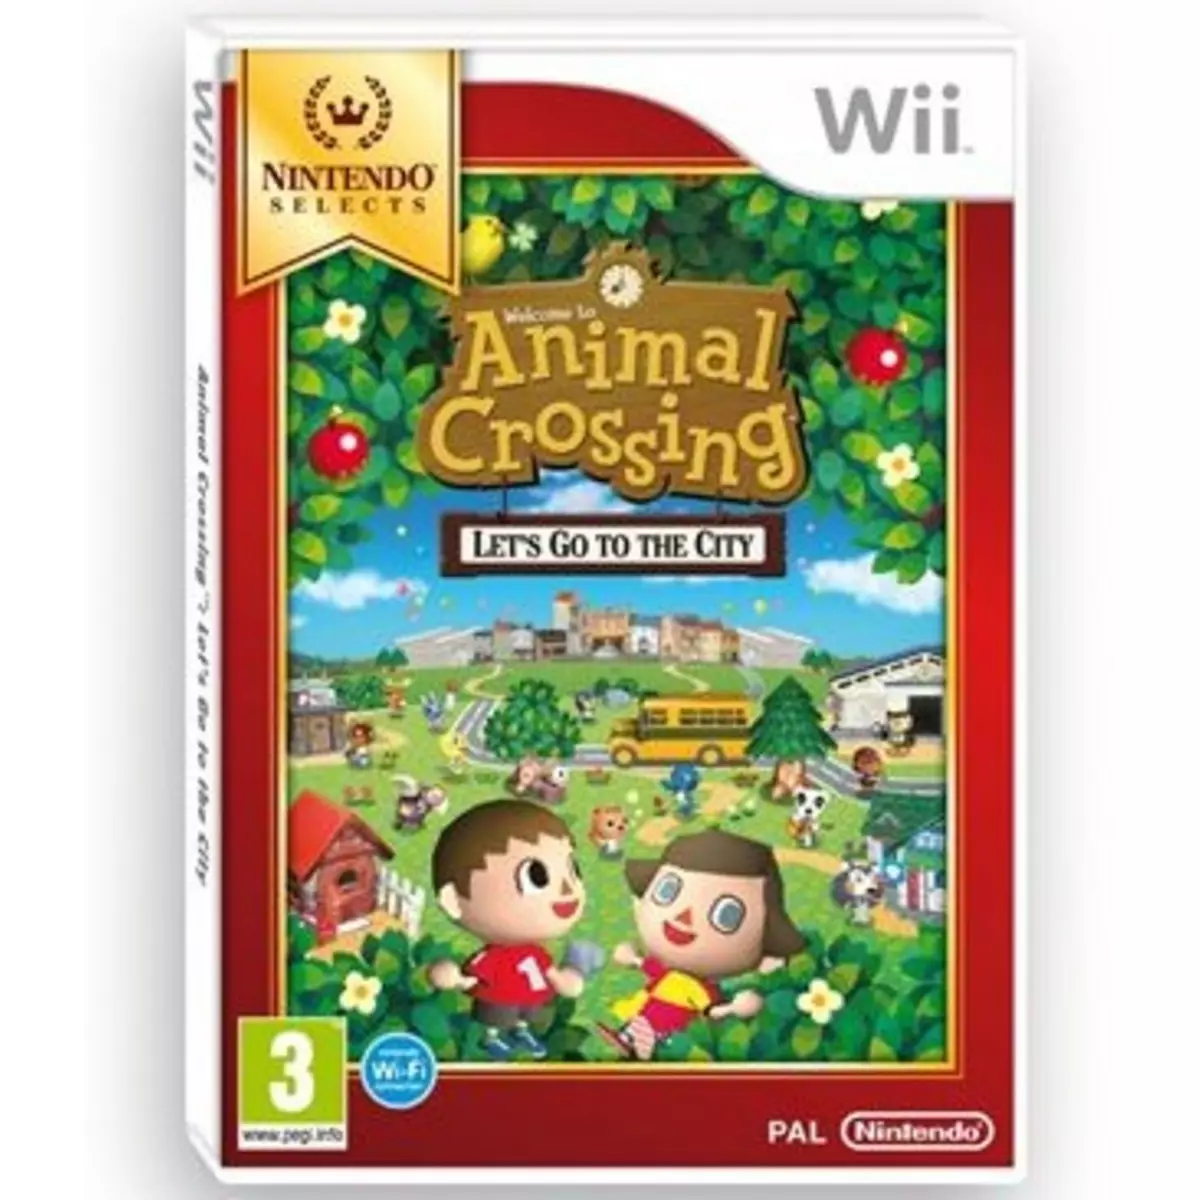 Animal Crossing Wii - Let's Go to the City - Nintendo Selects